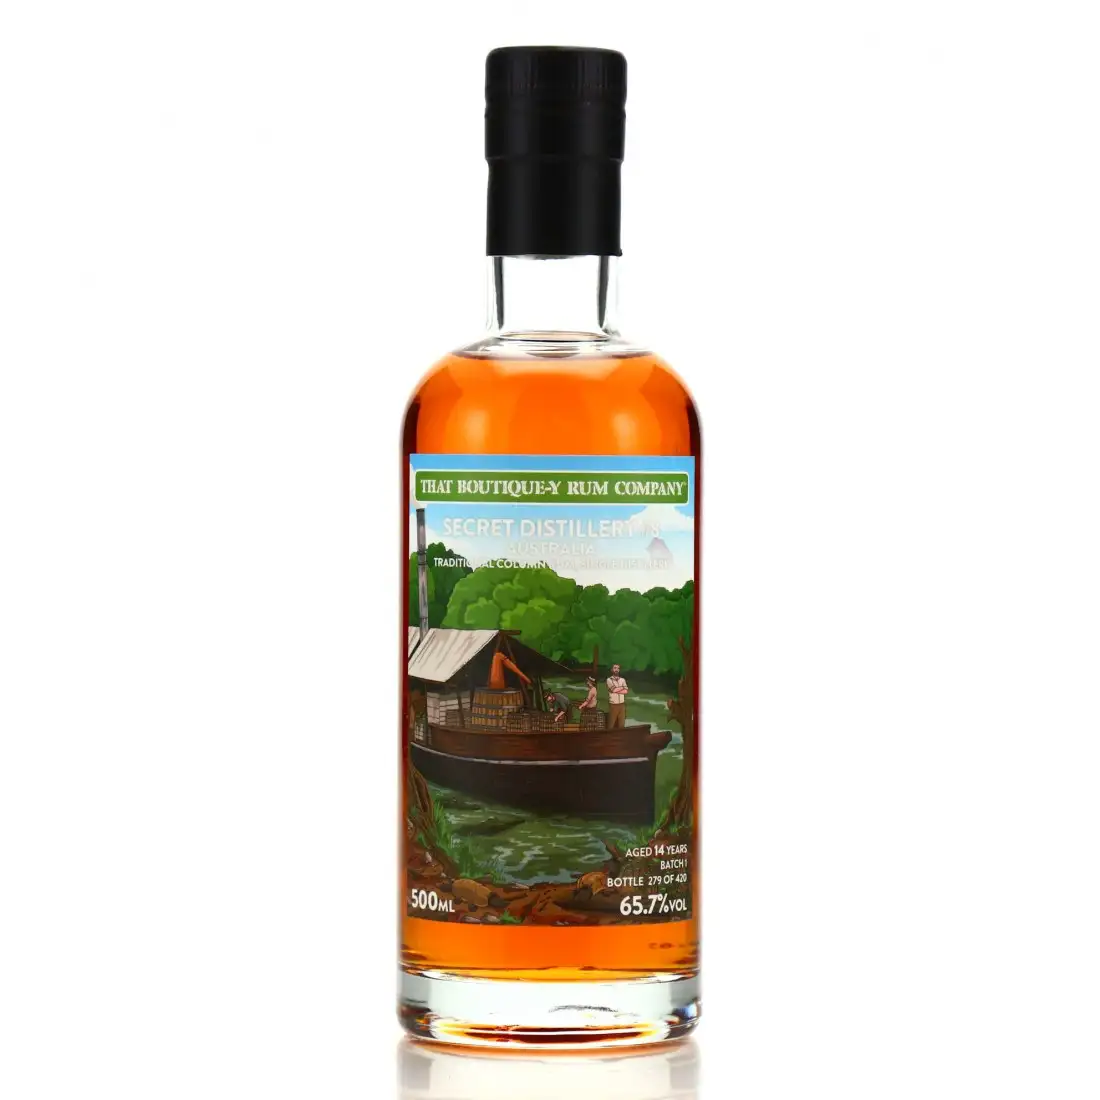 Image of the front of the bottle of the rum Australia Secret Distillery #8